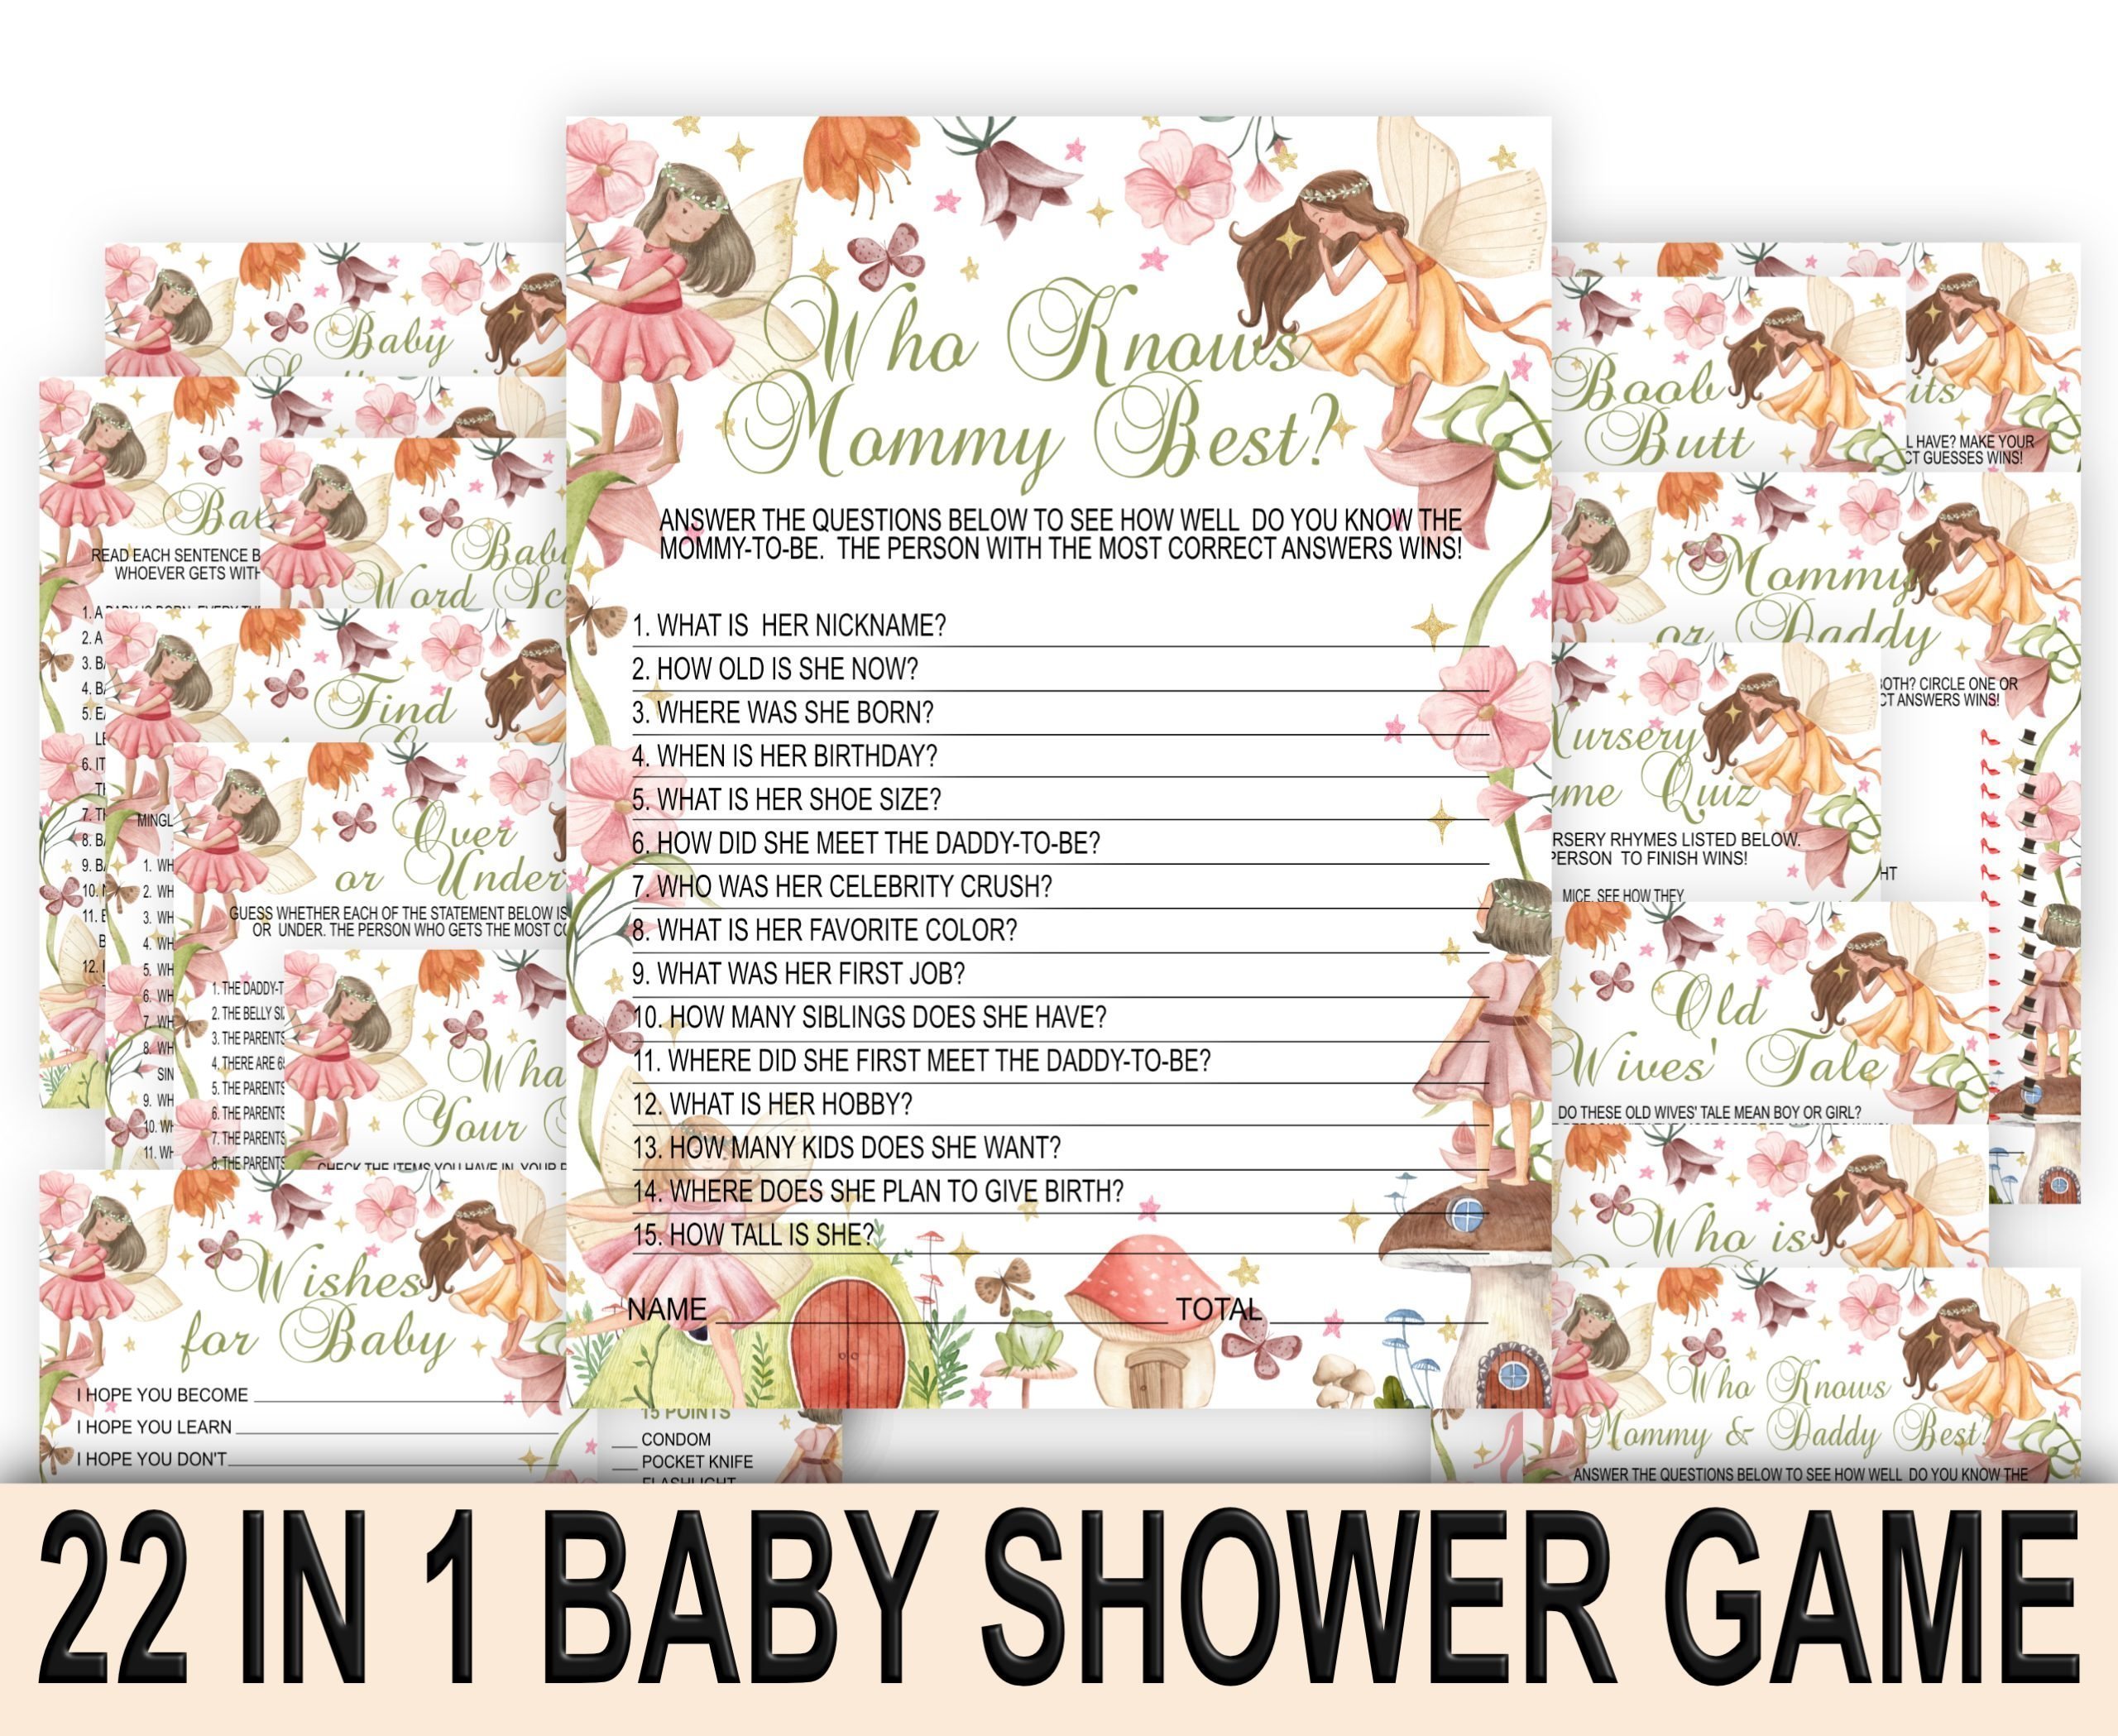 BABY SHOWER Enchanted Fairy Baby Shower Games Bundle Bundle Set with 22 Games